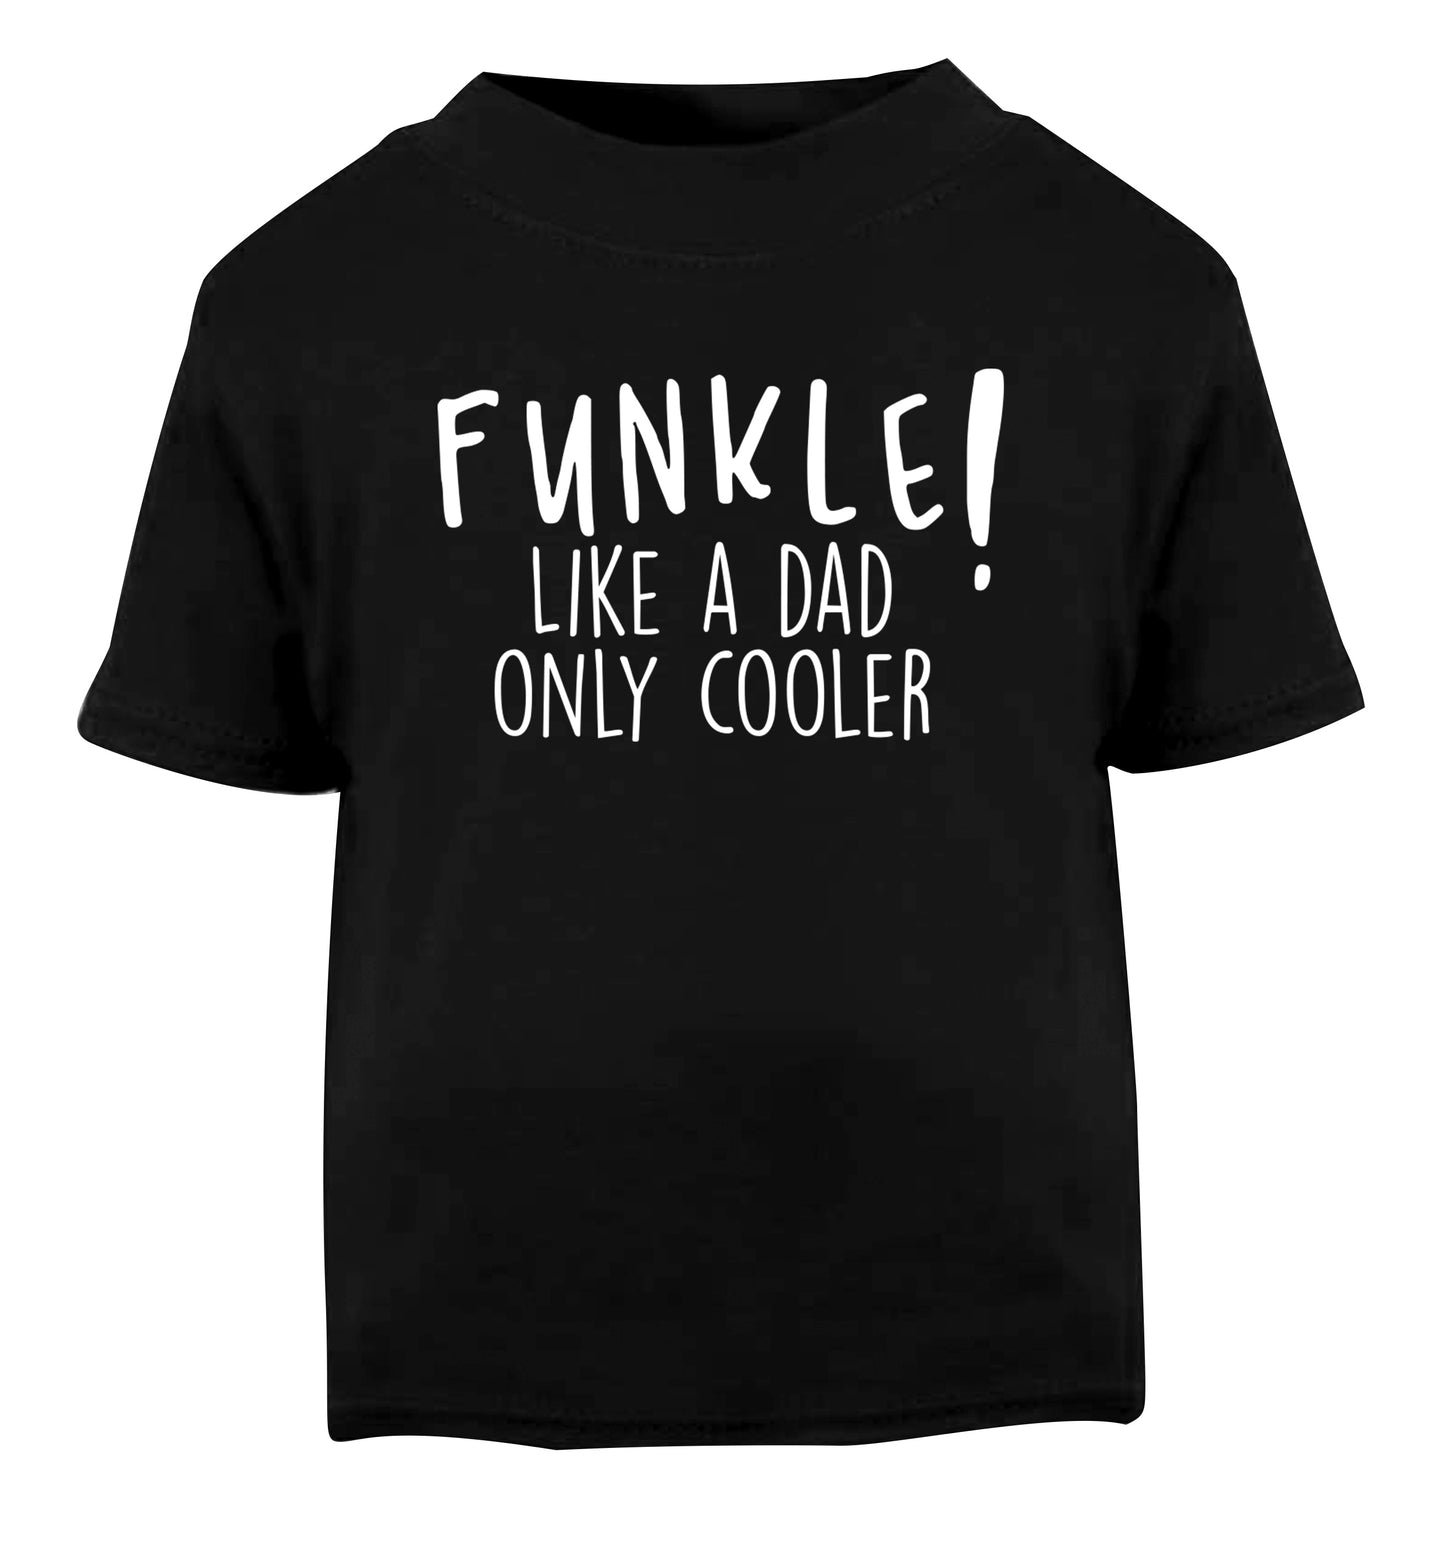 Funkle Like a Dad Only Cooler Black Baby Toddler Tshirt 2 years